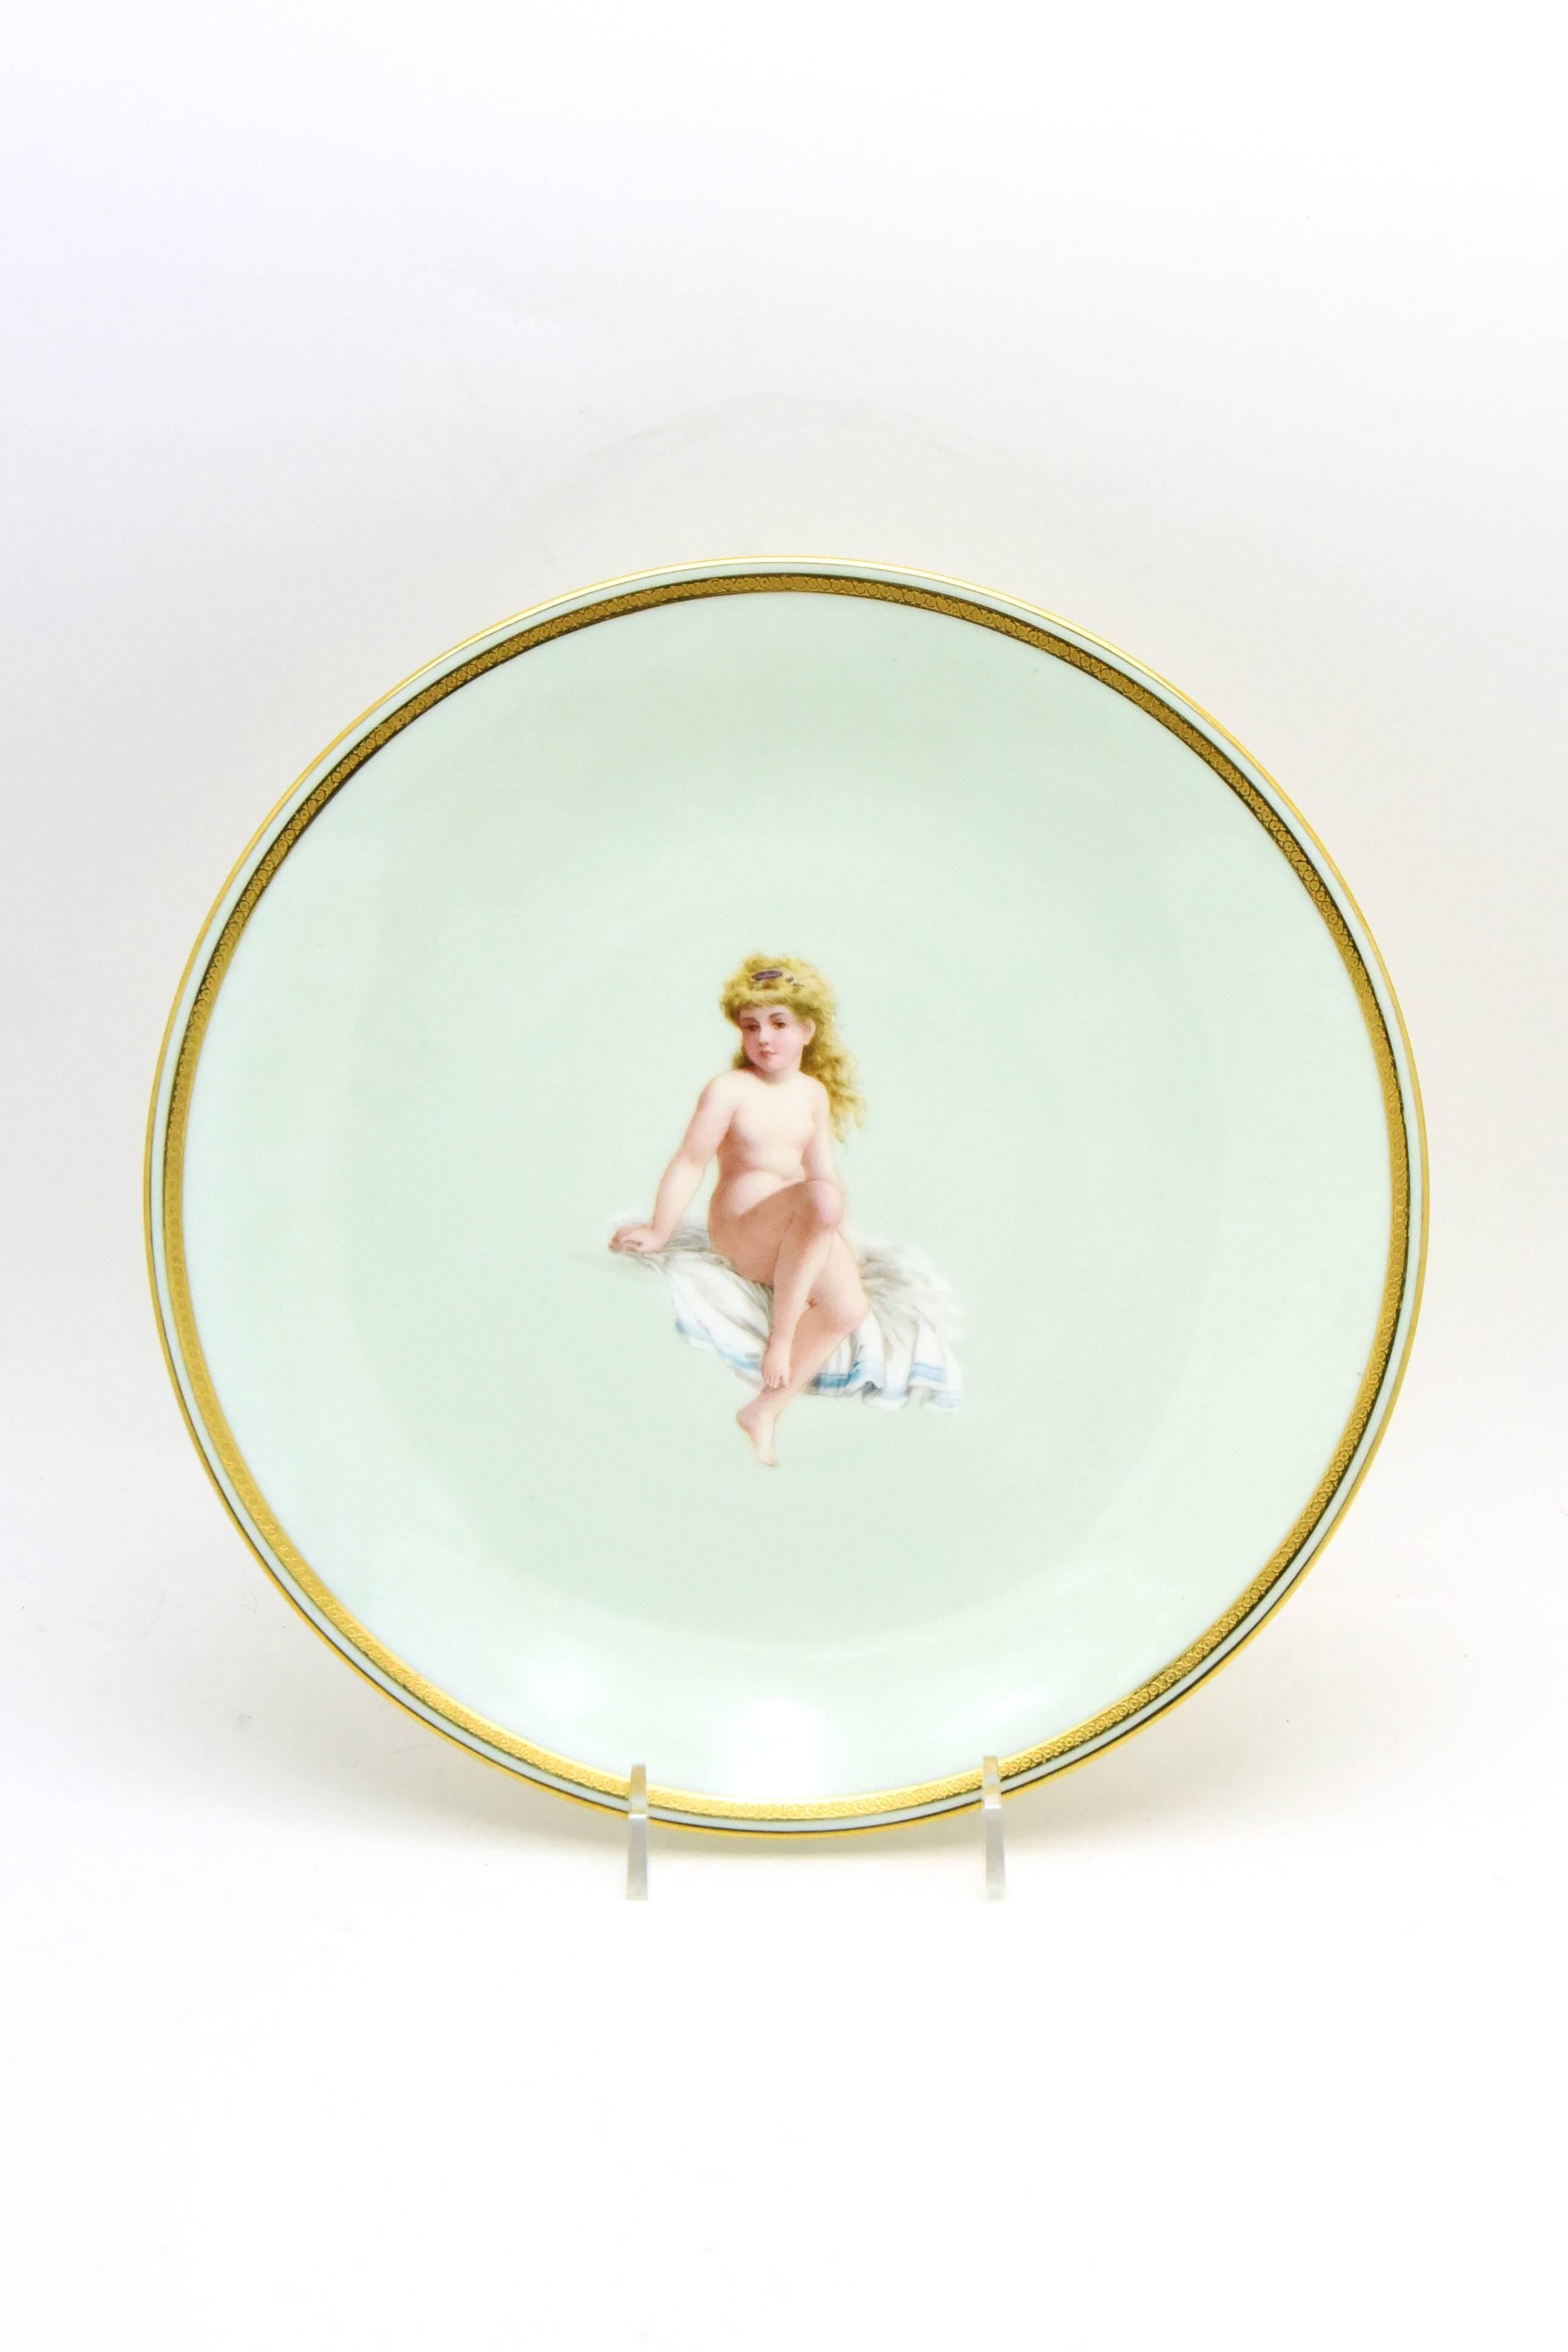 This amazing set of nine Mintons, 19th century cabinet plates depicting young nymphs in fanciful, bucolic settings are beautifully and realistically painted on a soft aqua background framed by a simple acid-etched border. Each uniquely painted